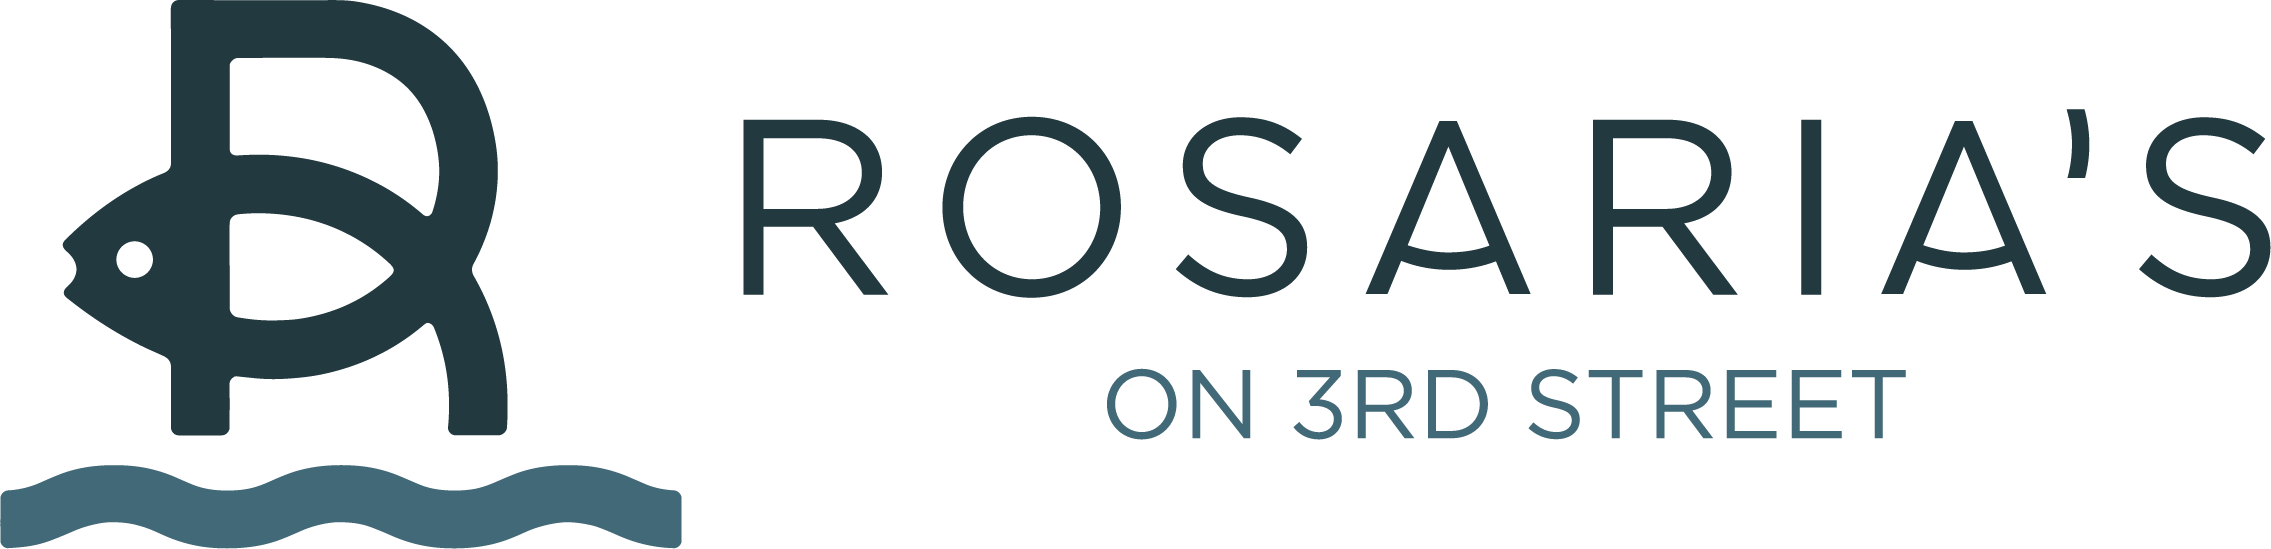 Rosaria's on 3rd Street